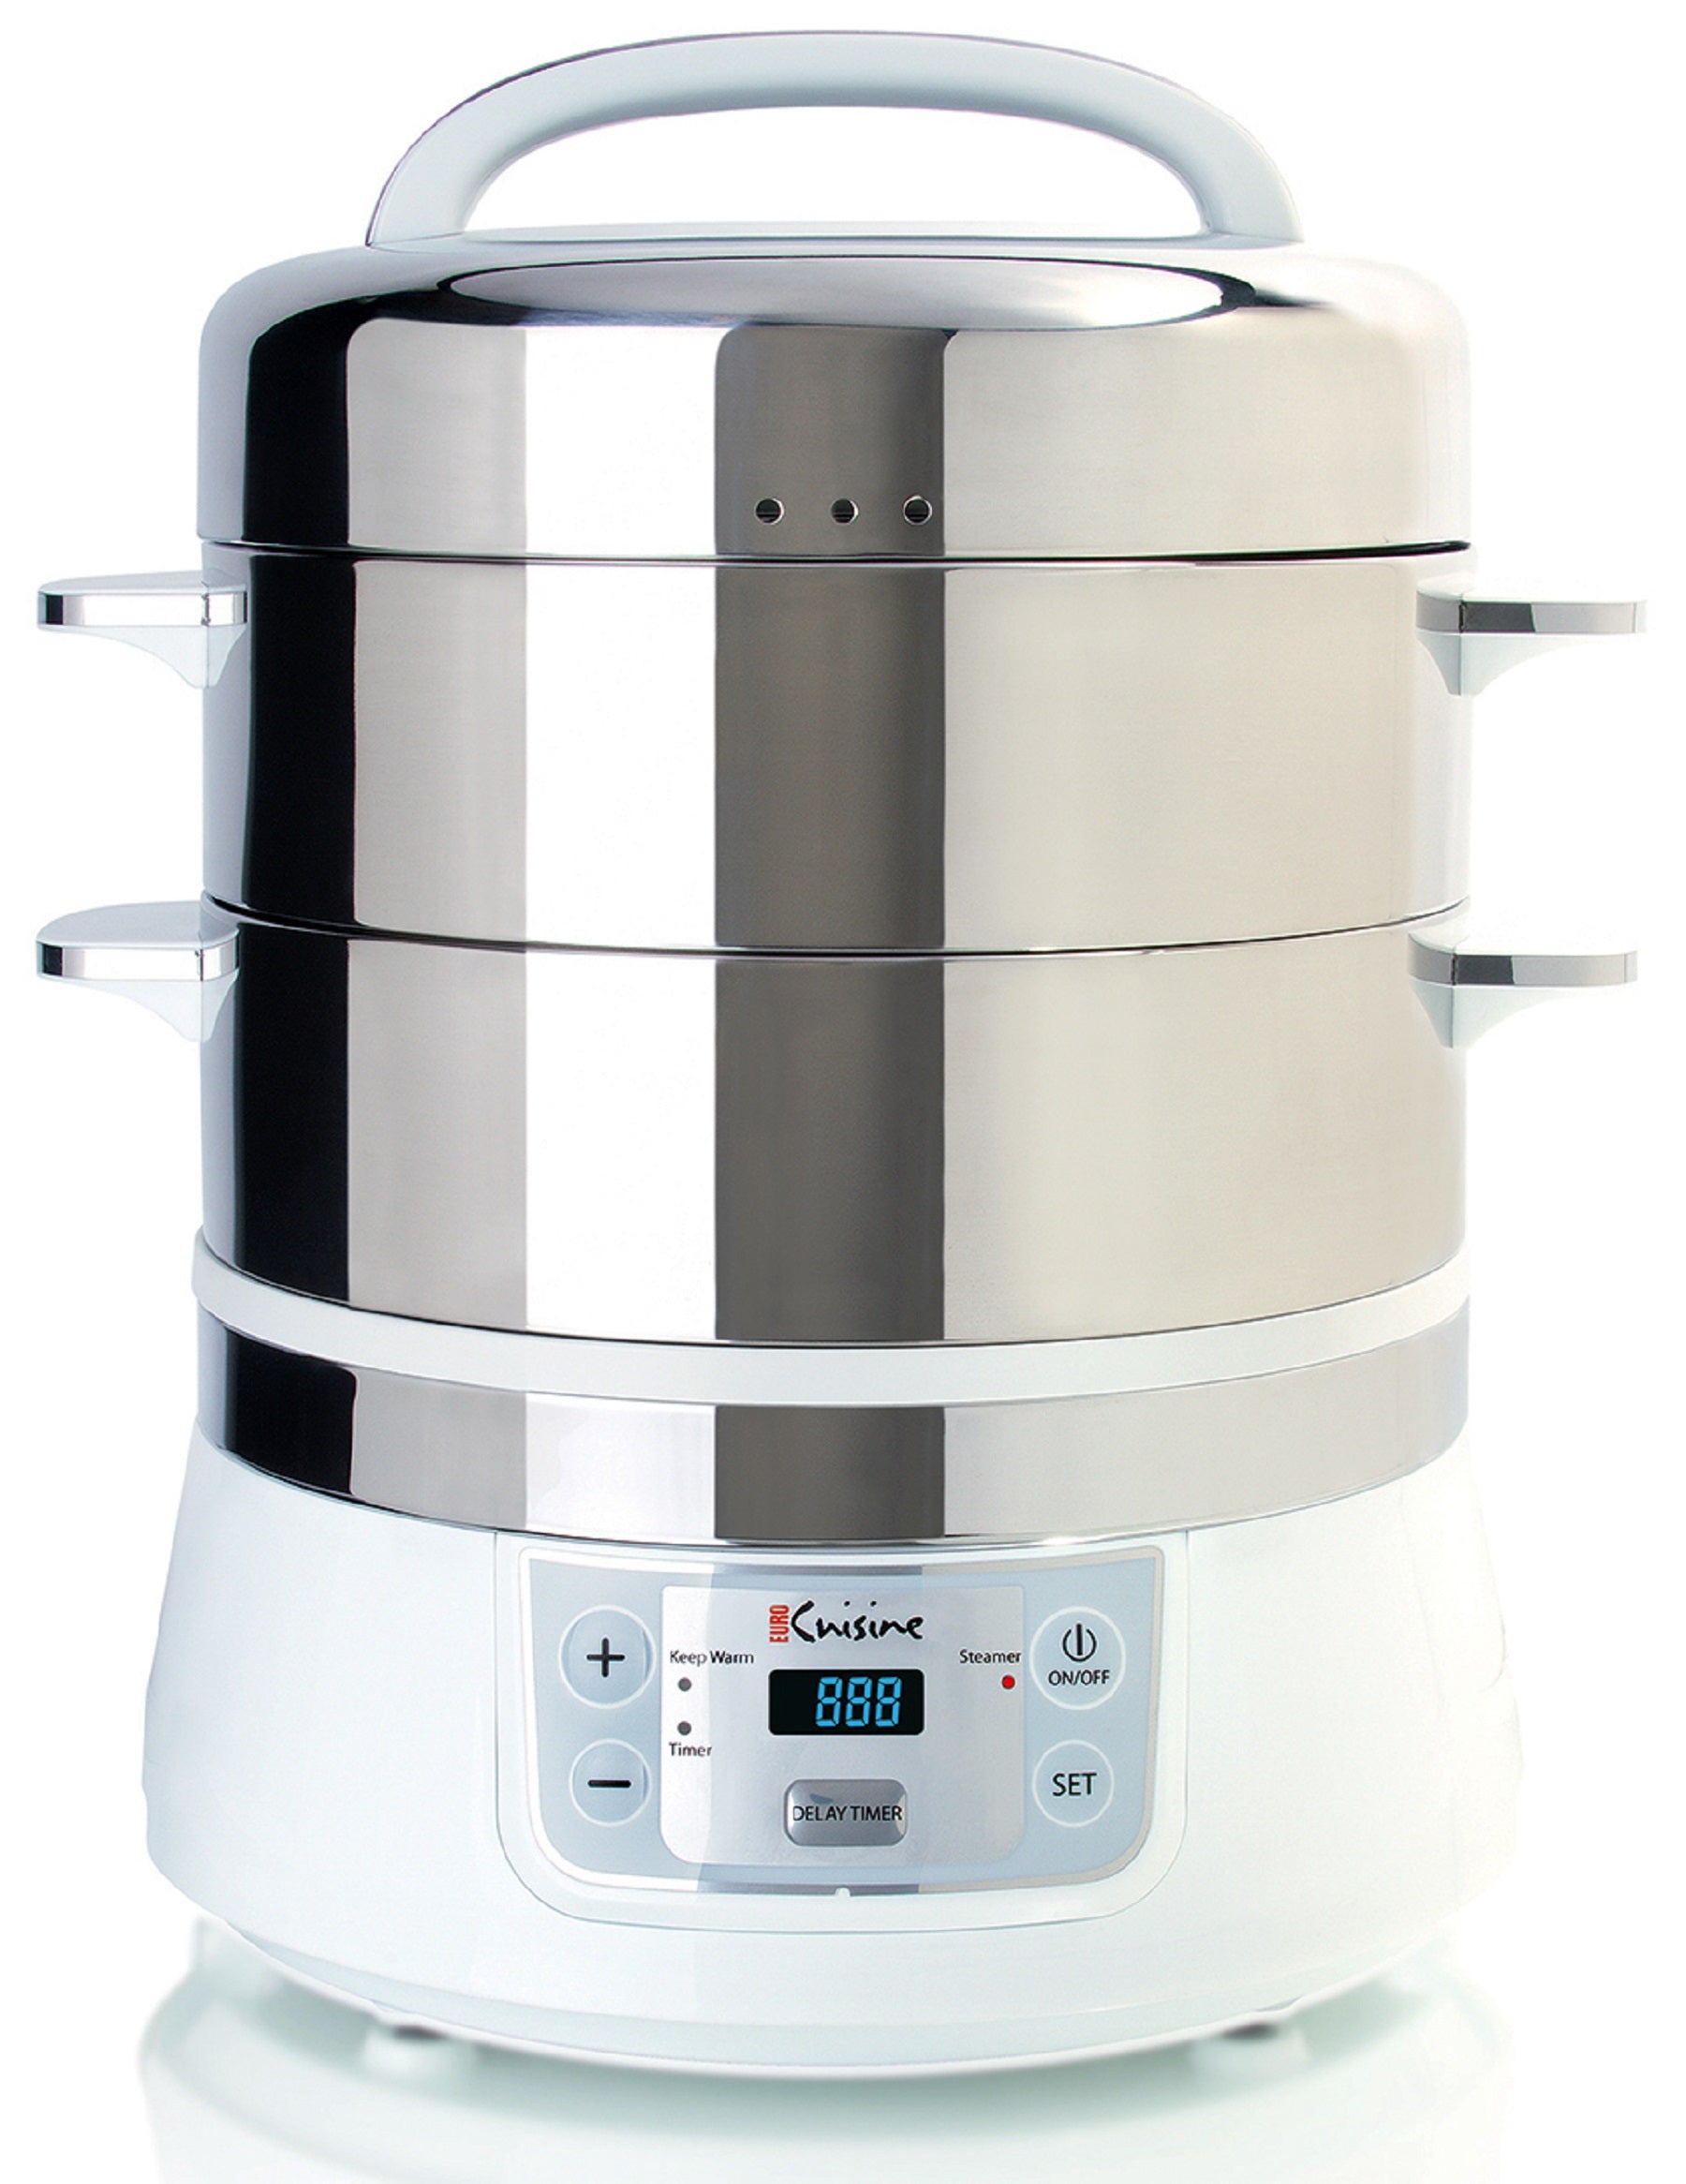 Stainless Steel Food Steamer Tagged FS3200 - Euro Cuisine Inc